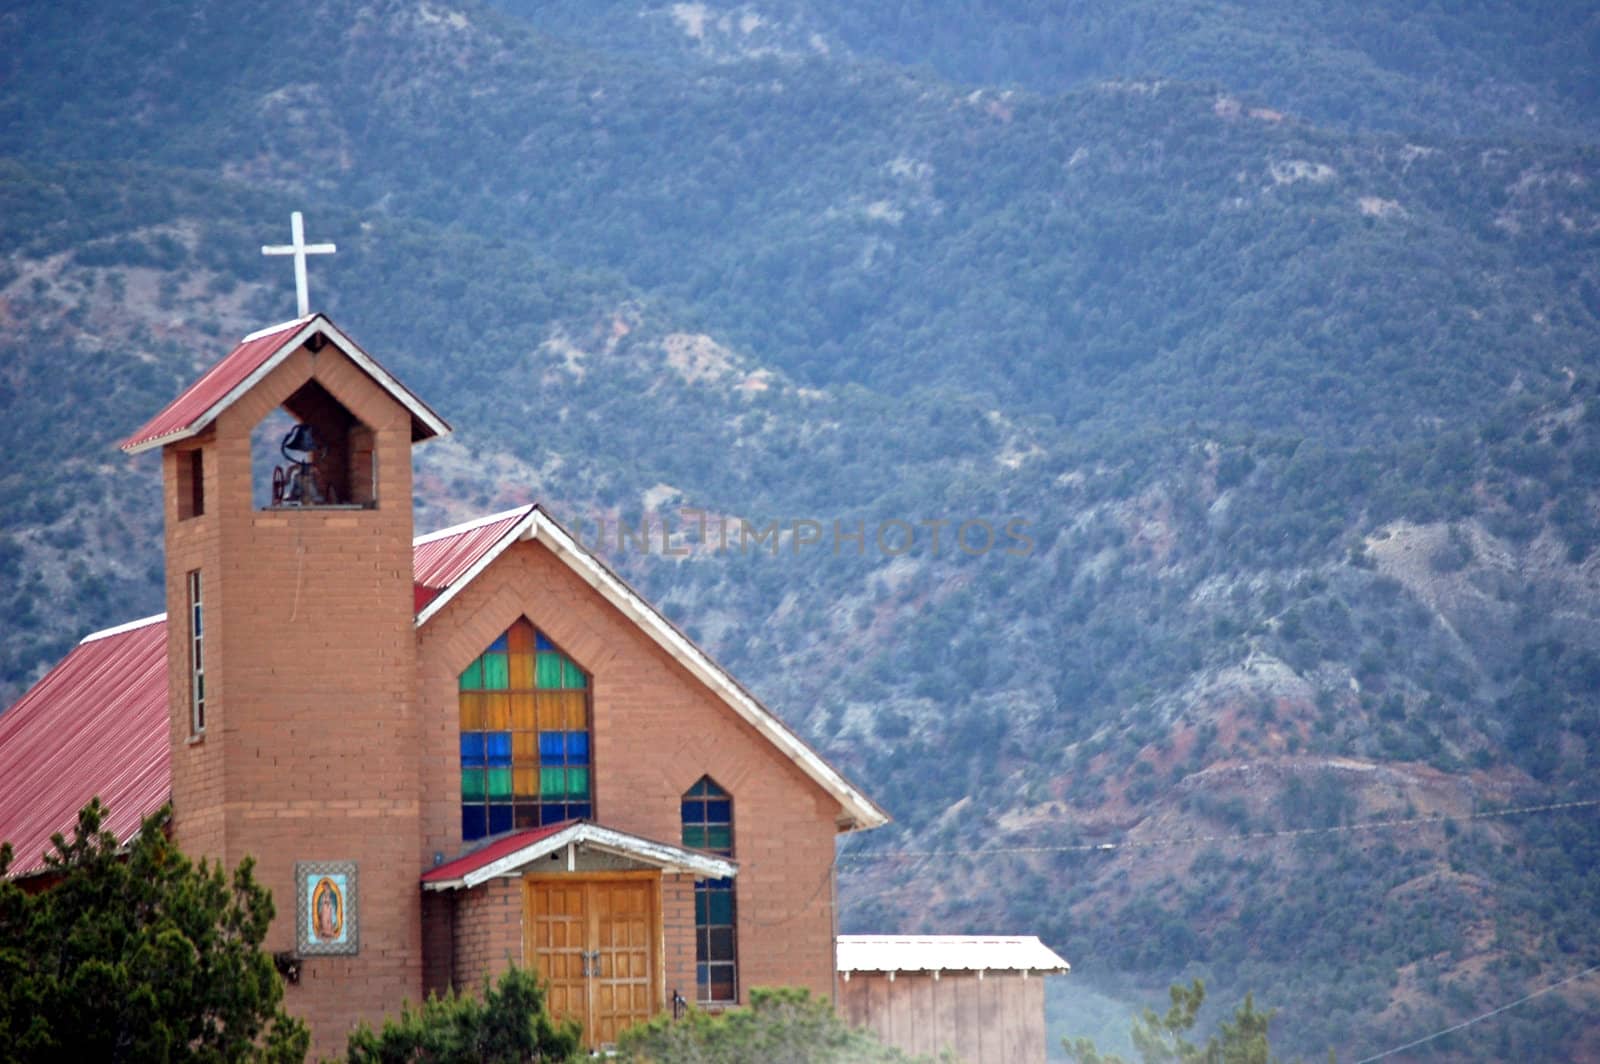 New Mexico Church by RefocusPhoto